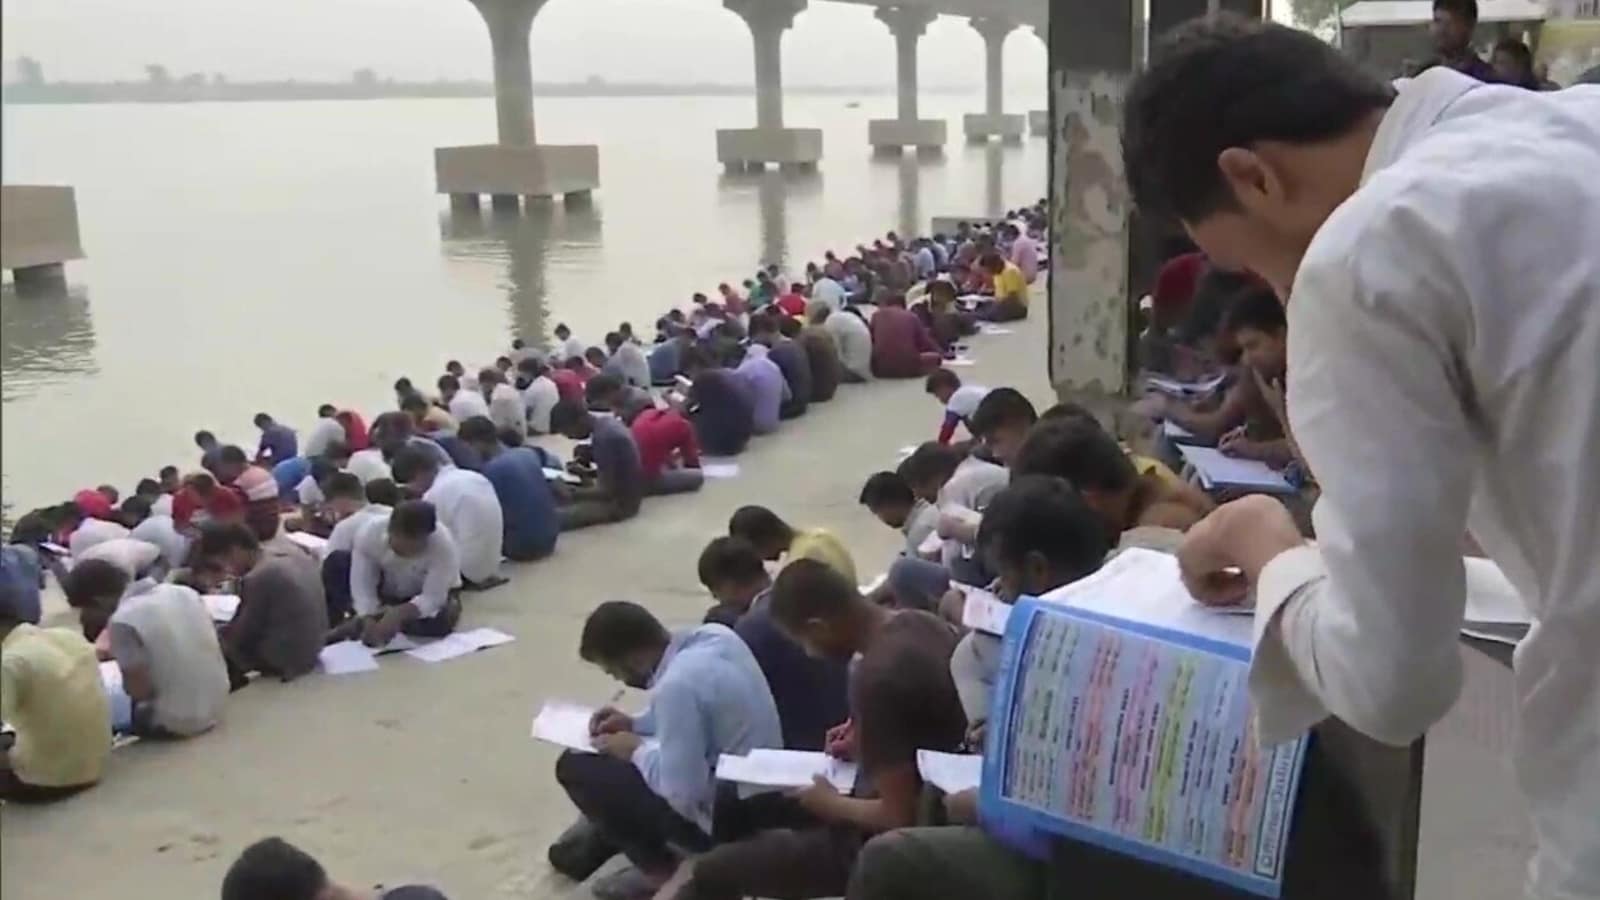 ‘Killing unemployment’: Bihar students gather to study for govt jobs | In pics